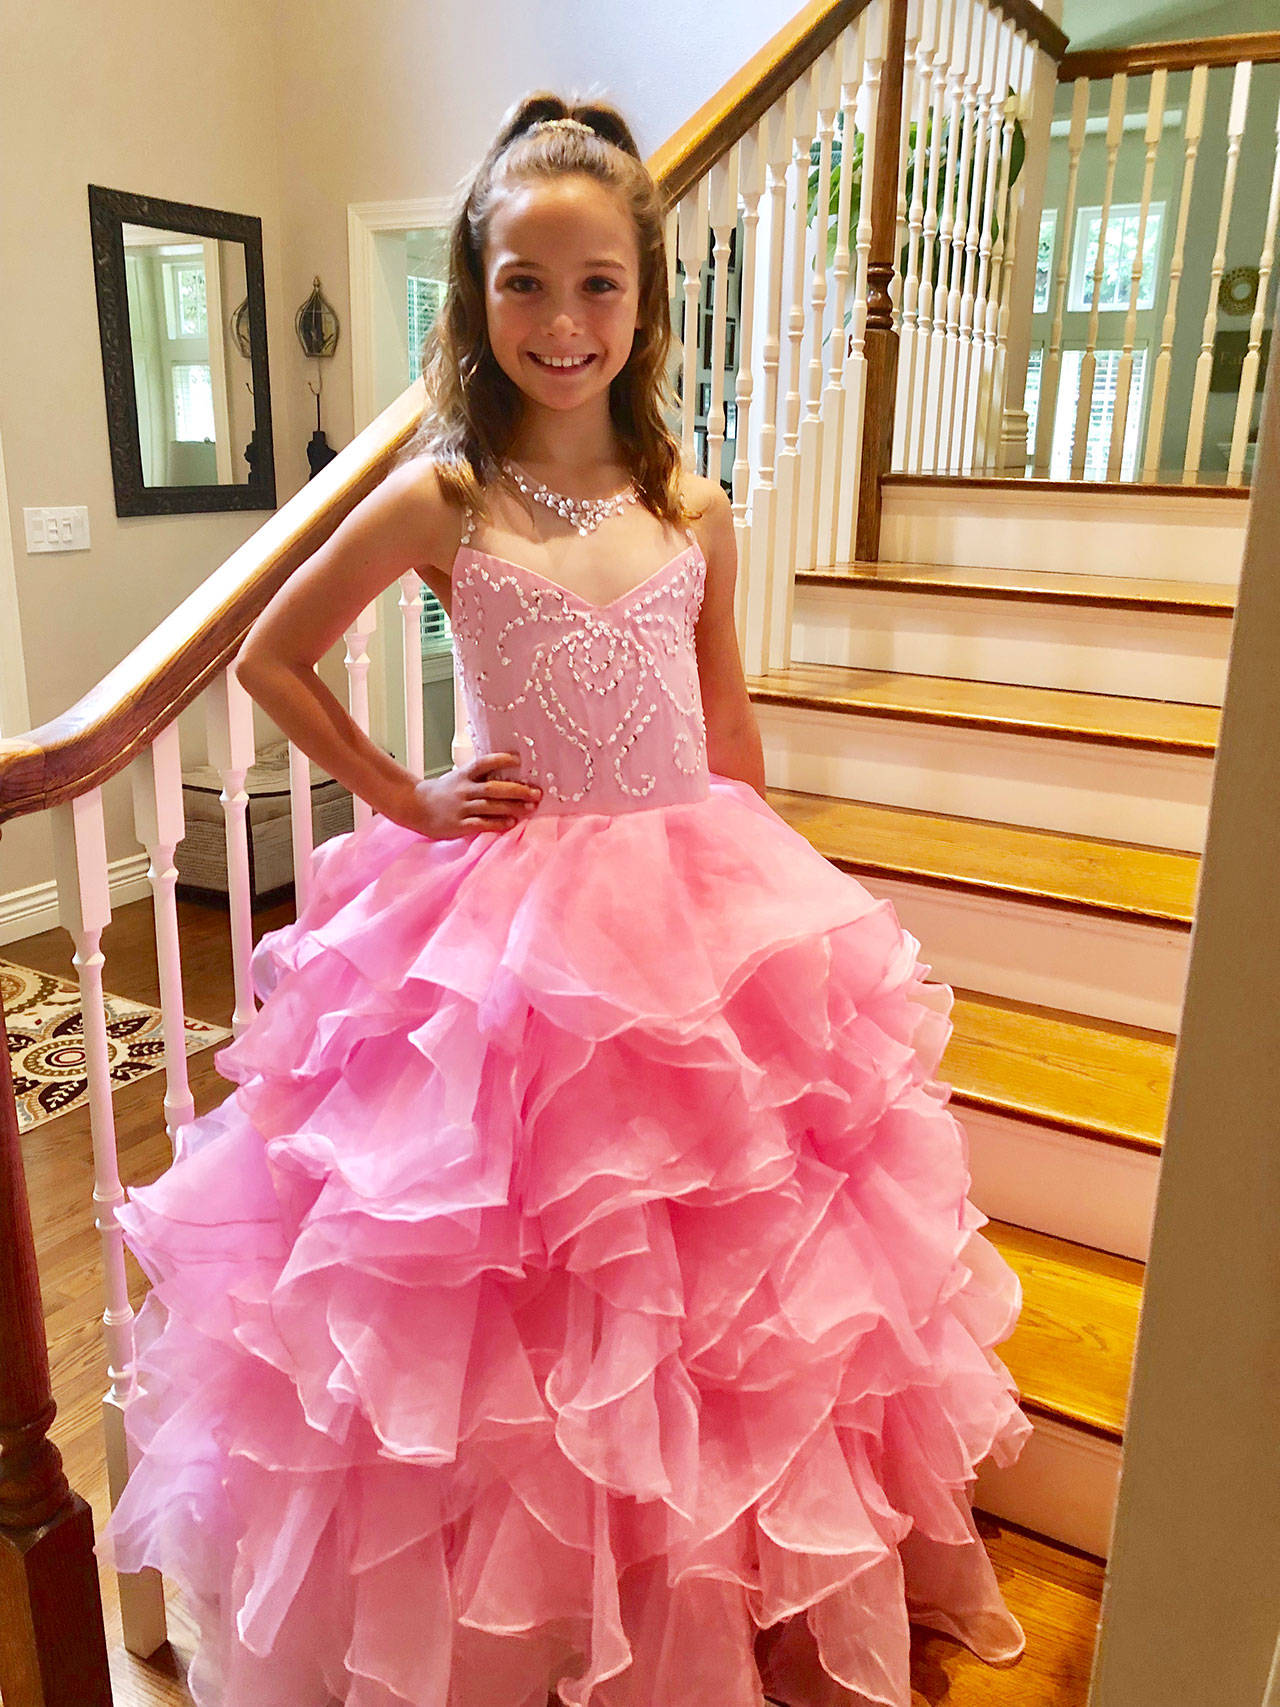 Genevieve Wakefield, 9, seeks the Miss Washington Junior Pre-Teen title this Saturday and Sunday where she’ll compete in multiple categories, including personal interview and personal introduction in Tacoma. Photo courtesy of Lula Wakefield